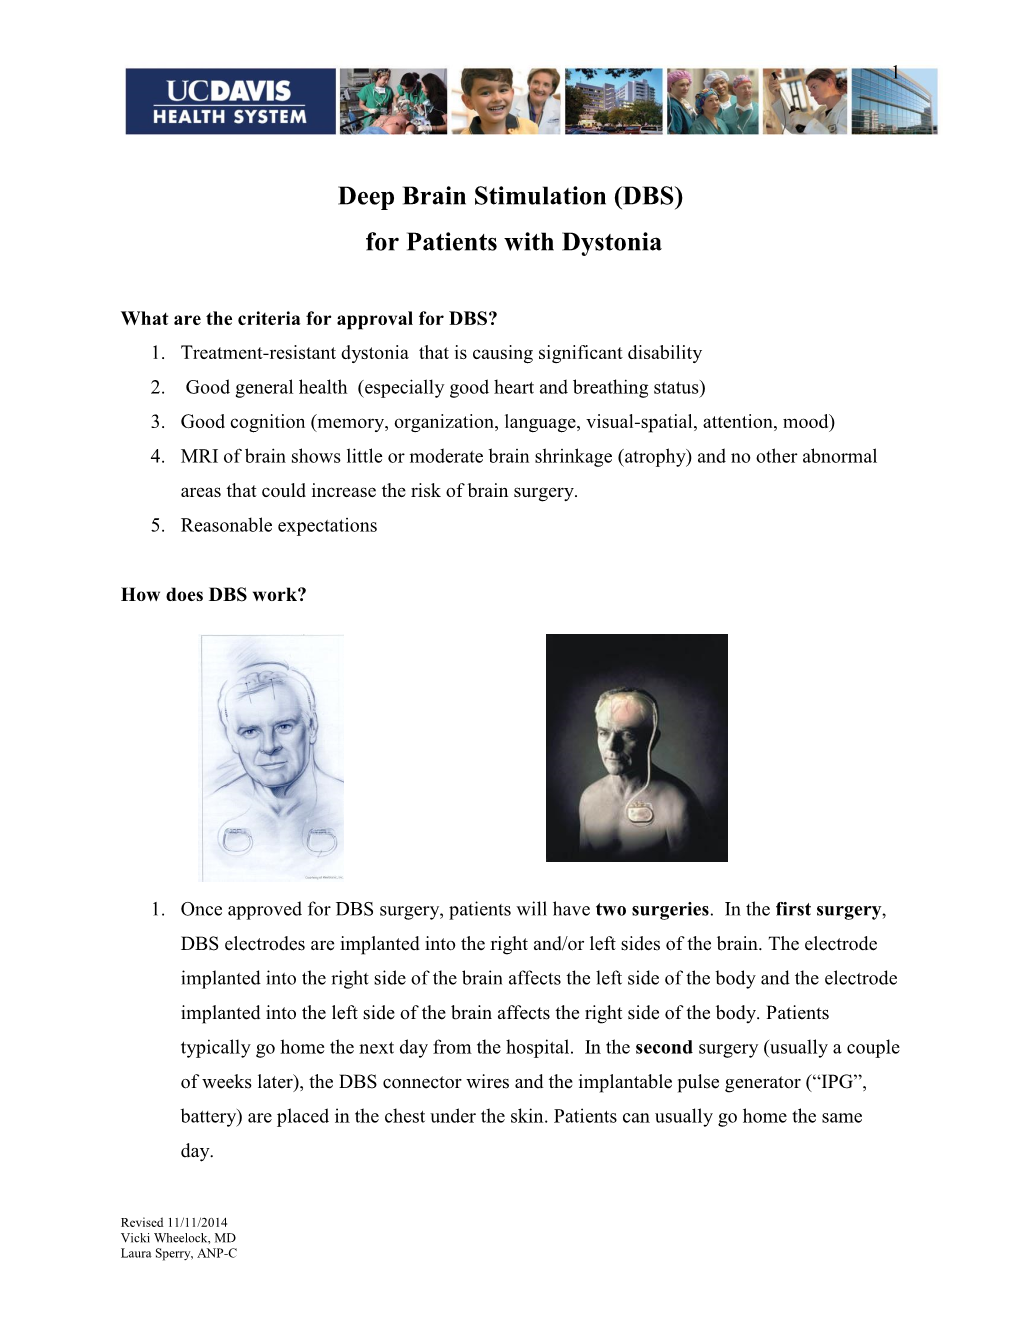 Deep Brain Stimulation (DBS) for Patients with Dystonia